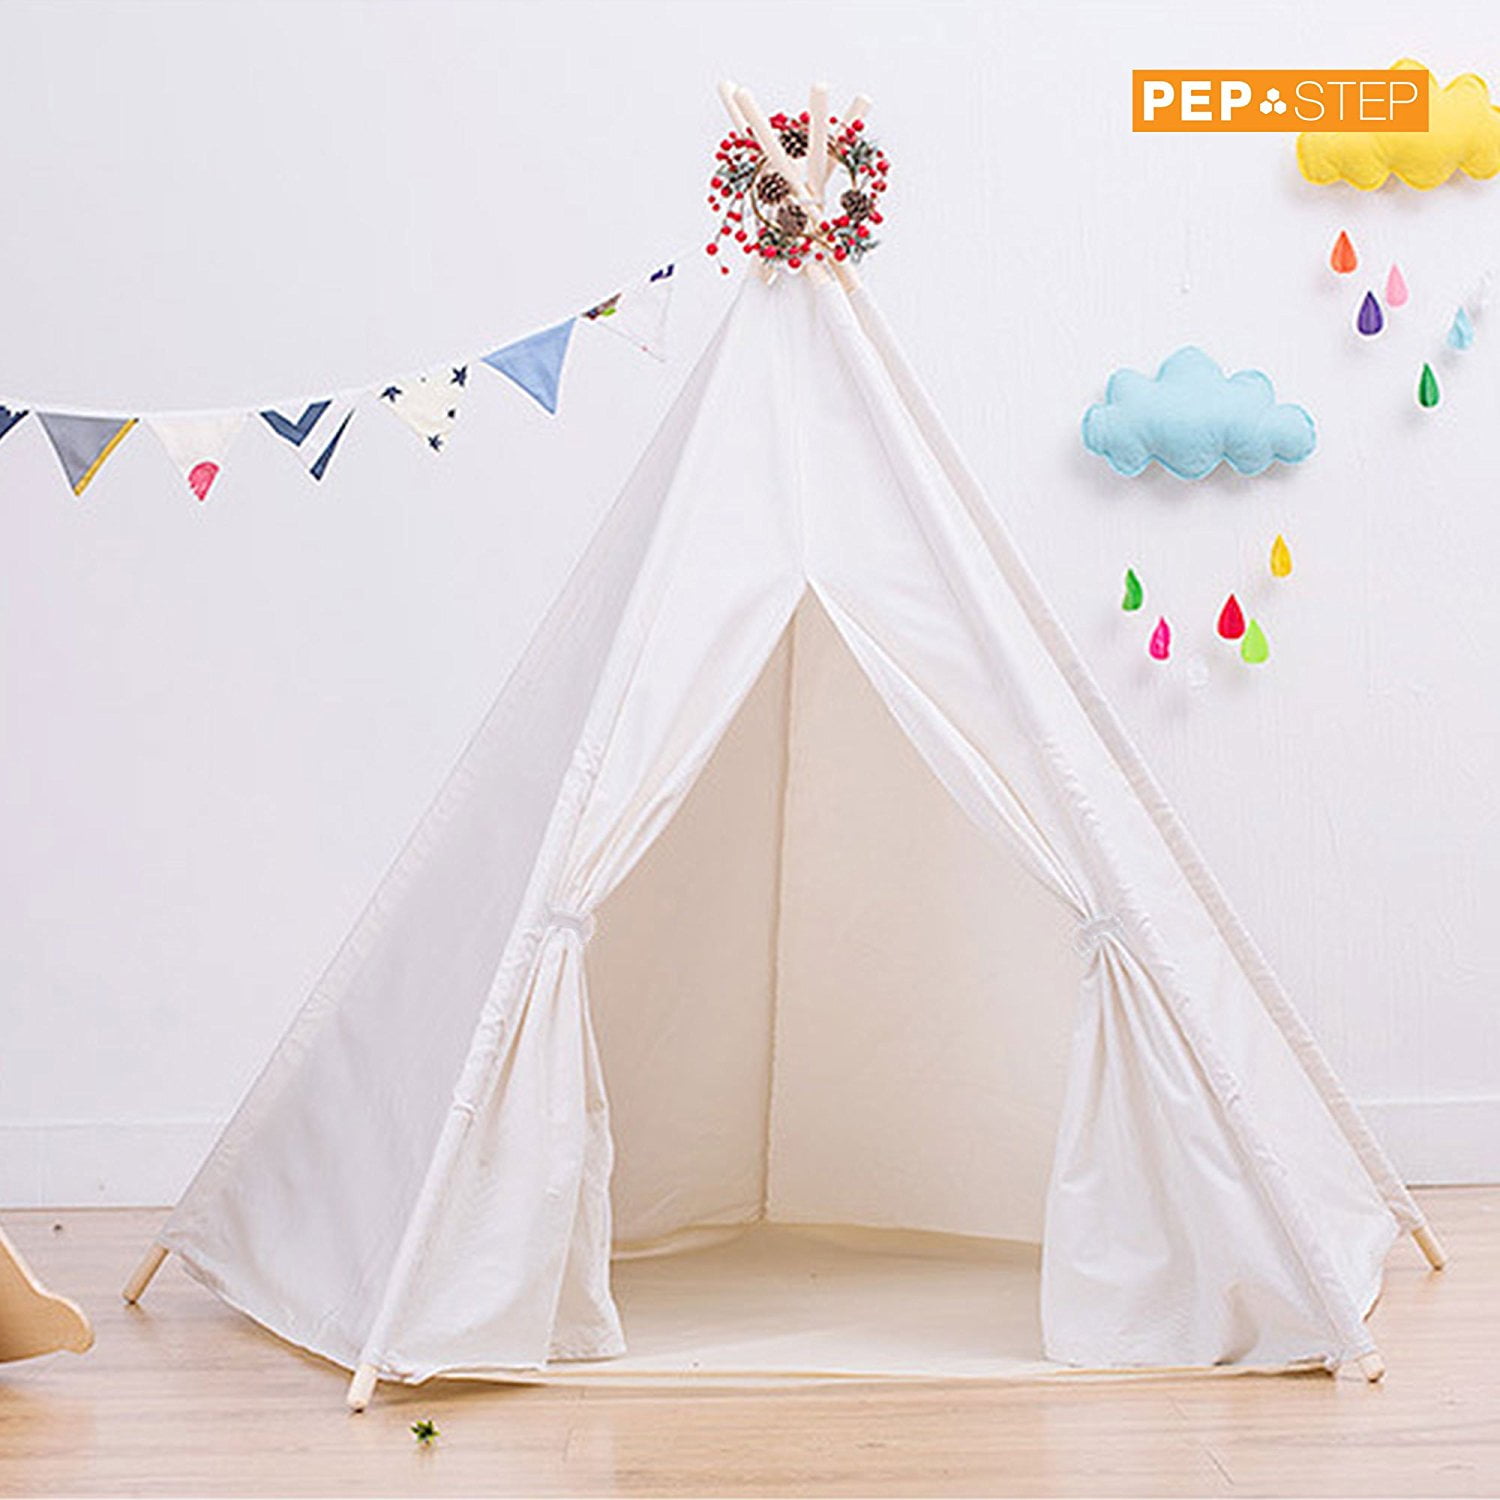 Teepee Tent Large Kids Play Tent for Boy Girl Indoor Cotton Canvas outdoor Toy 